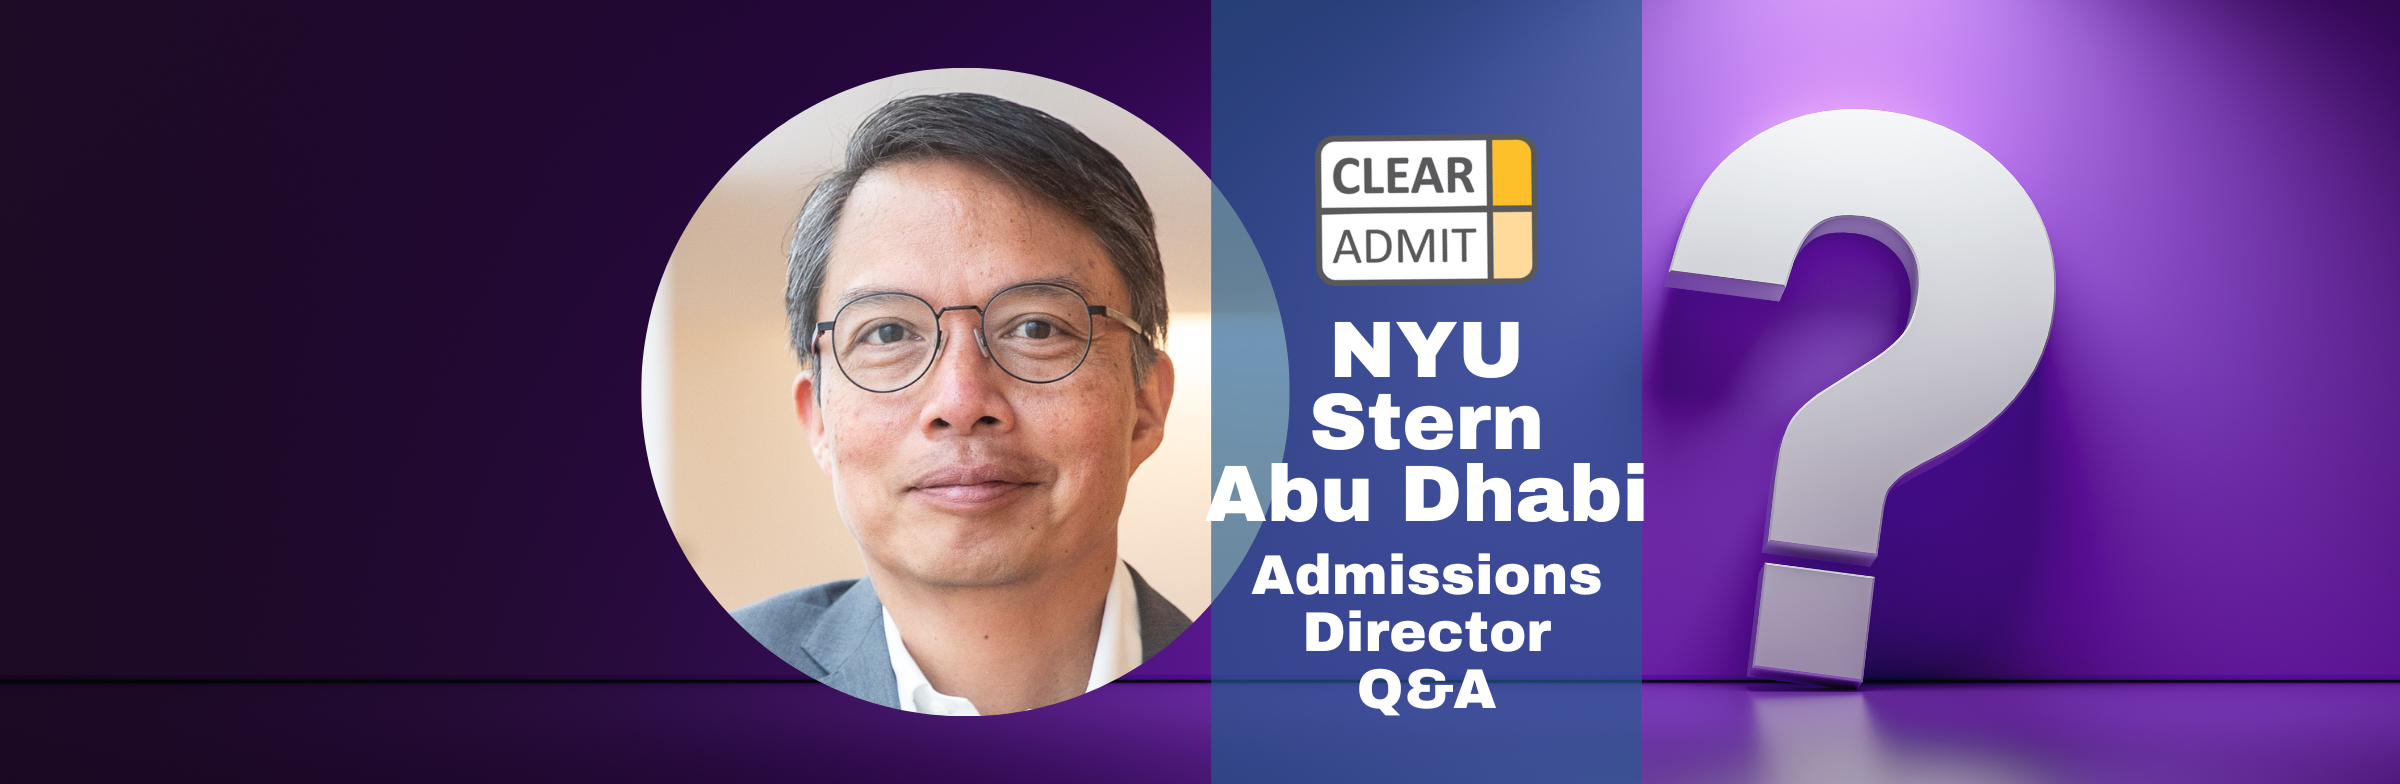 Image for Admissions Director Q&A: Arnold Longboy of Stern at NYU Abu Dhabi